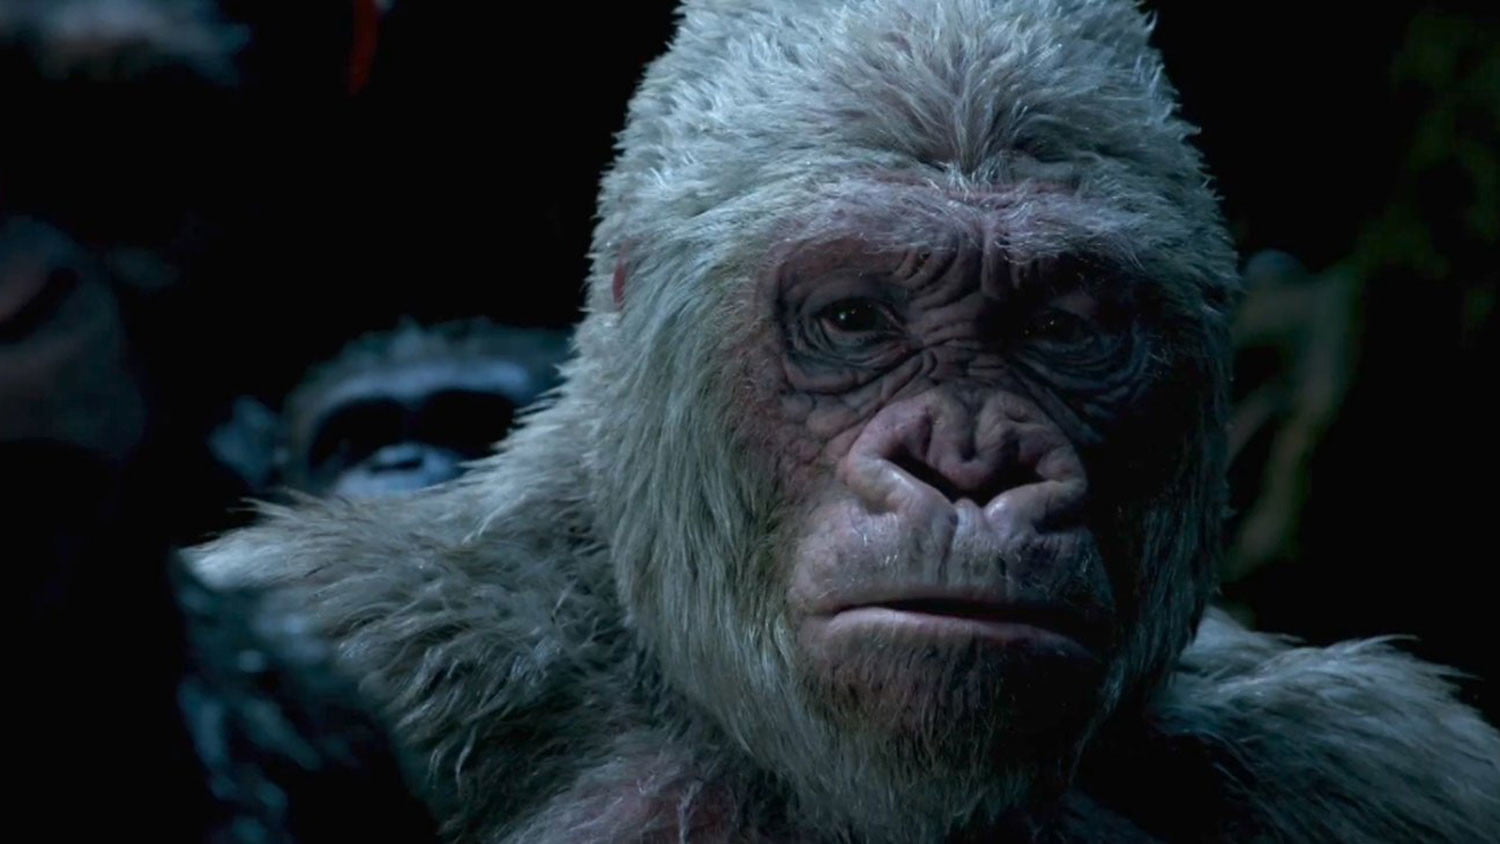 of the Apes 4 Release Date, Cast, Plot, Trailer, News